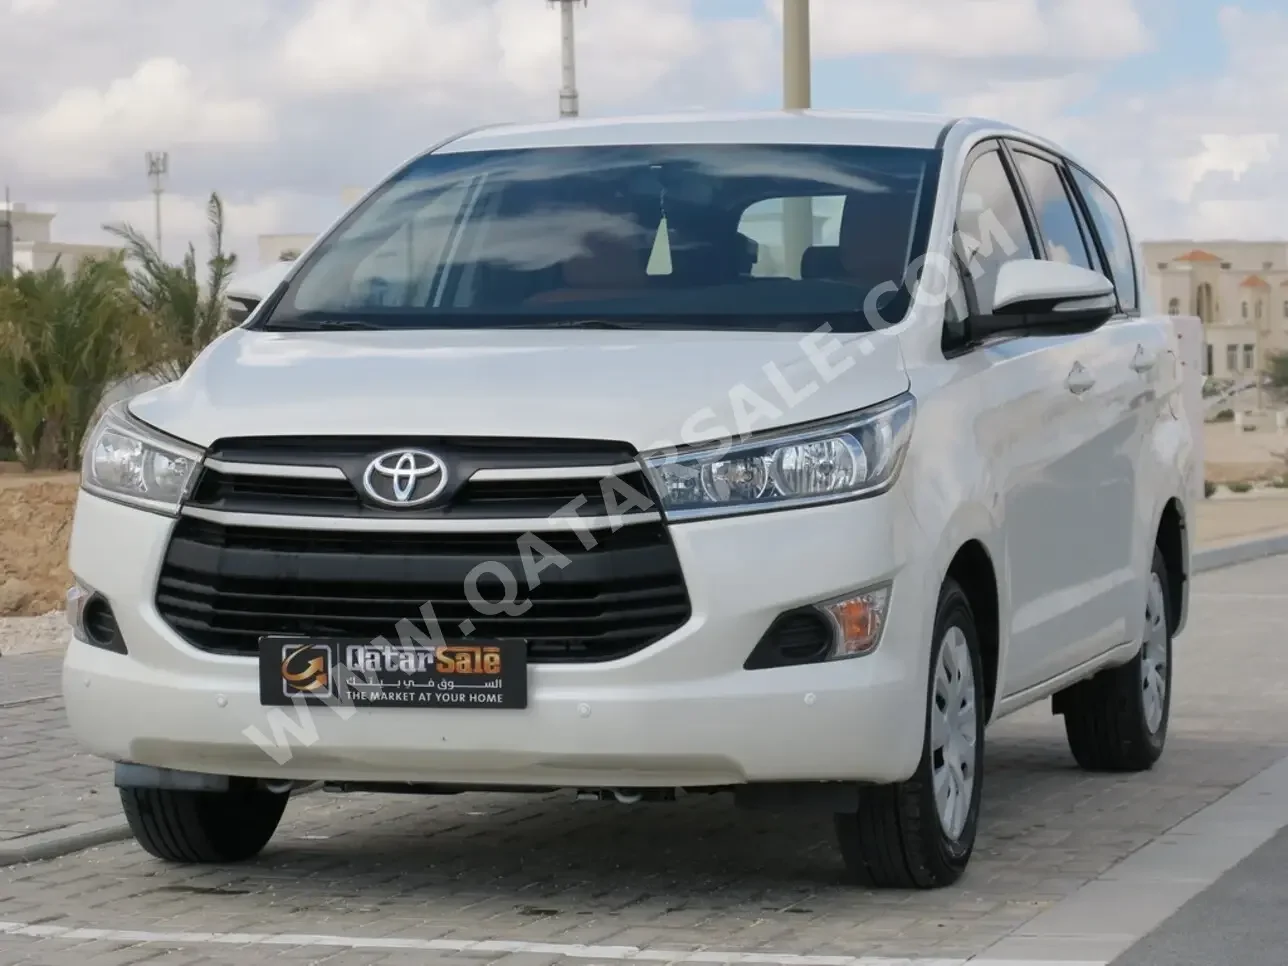 Toyota  Innova  2017  Automatic  71,000 Km  4 Cylinder  Front Wheel Drive (FWD)  Van / Bus  Pearl